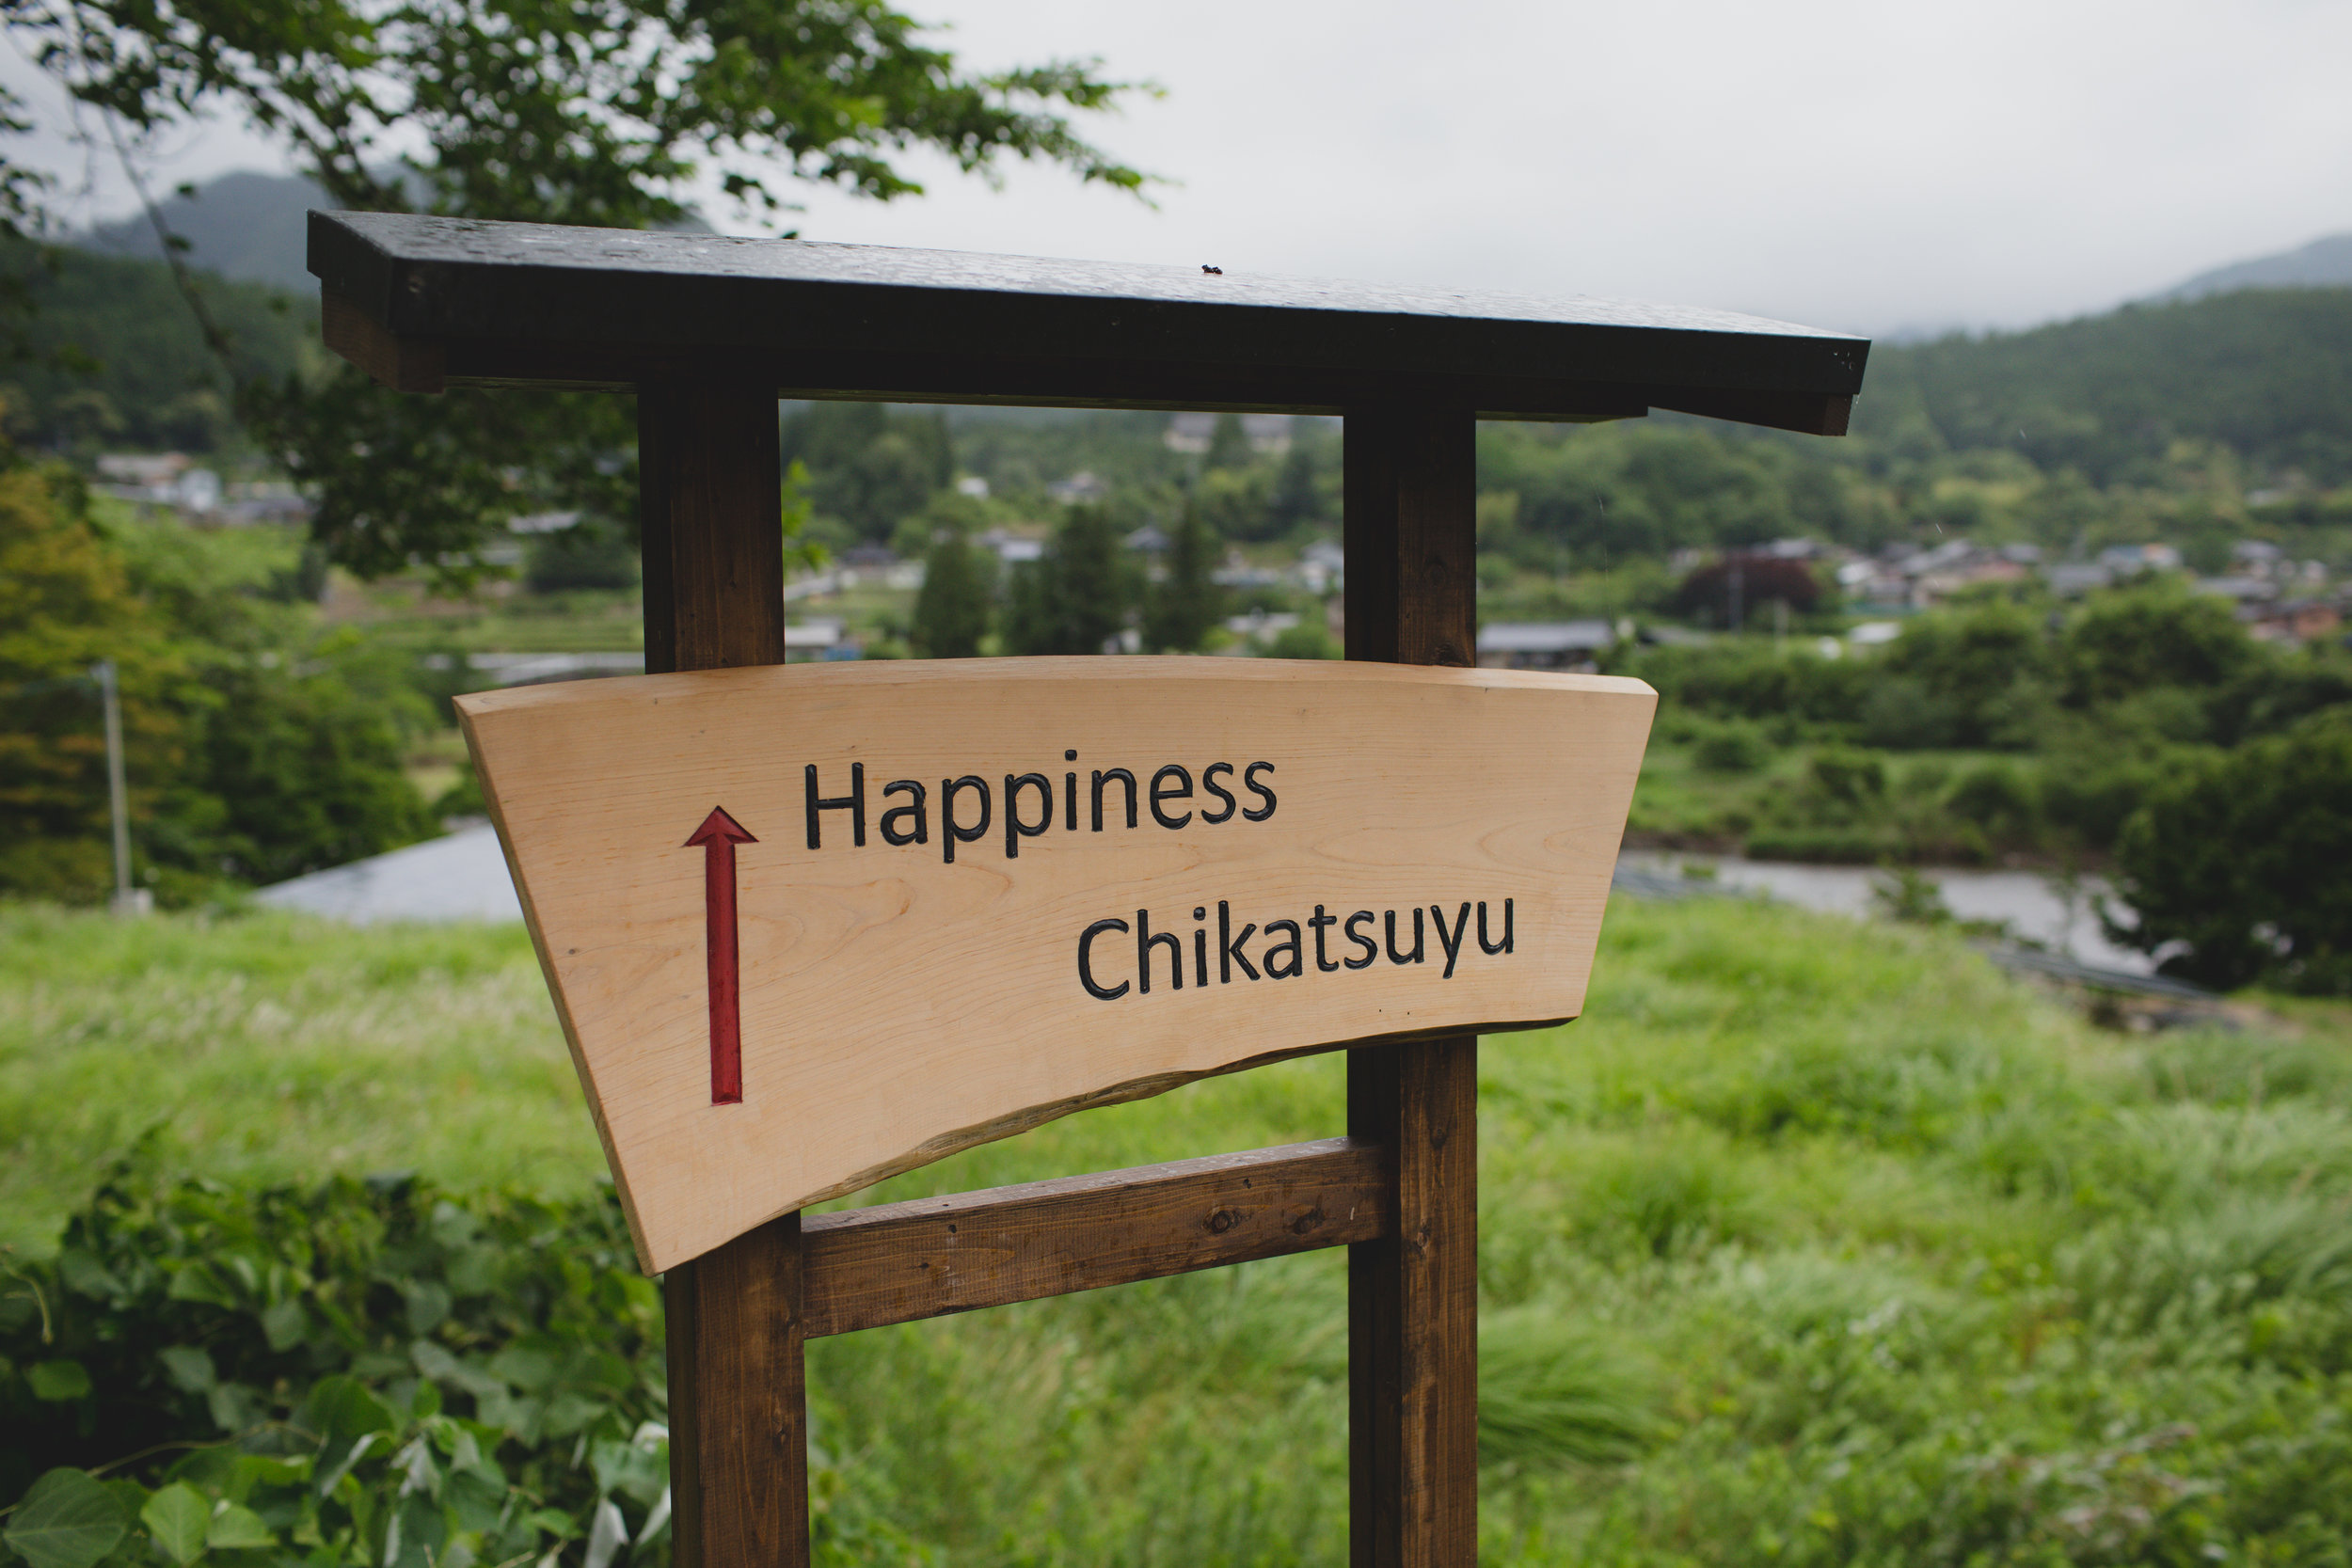  A sign for our ryokan (guesthouse) for the night.    After dropping off our bags, we hopped on bikes, rode around the town in the rain and visited the local onsen (hot spring) to relax 